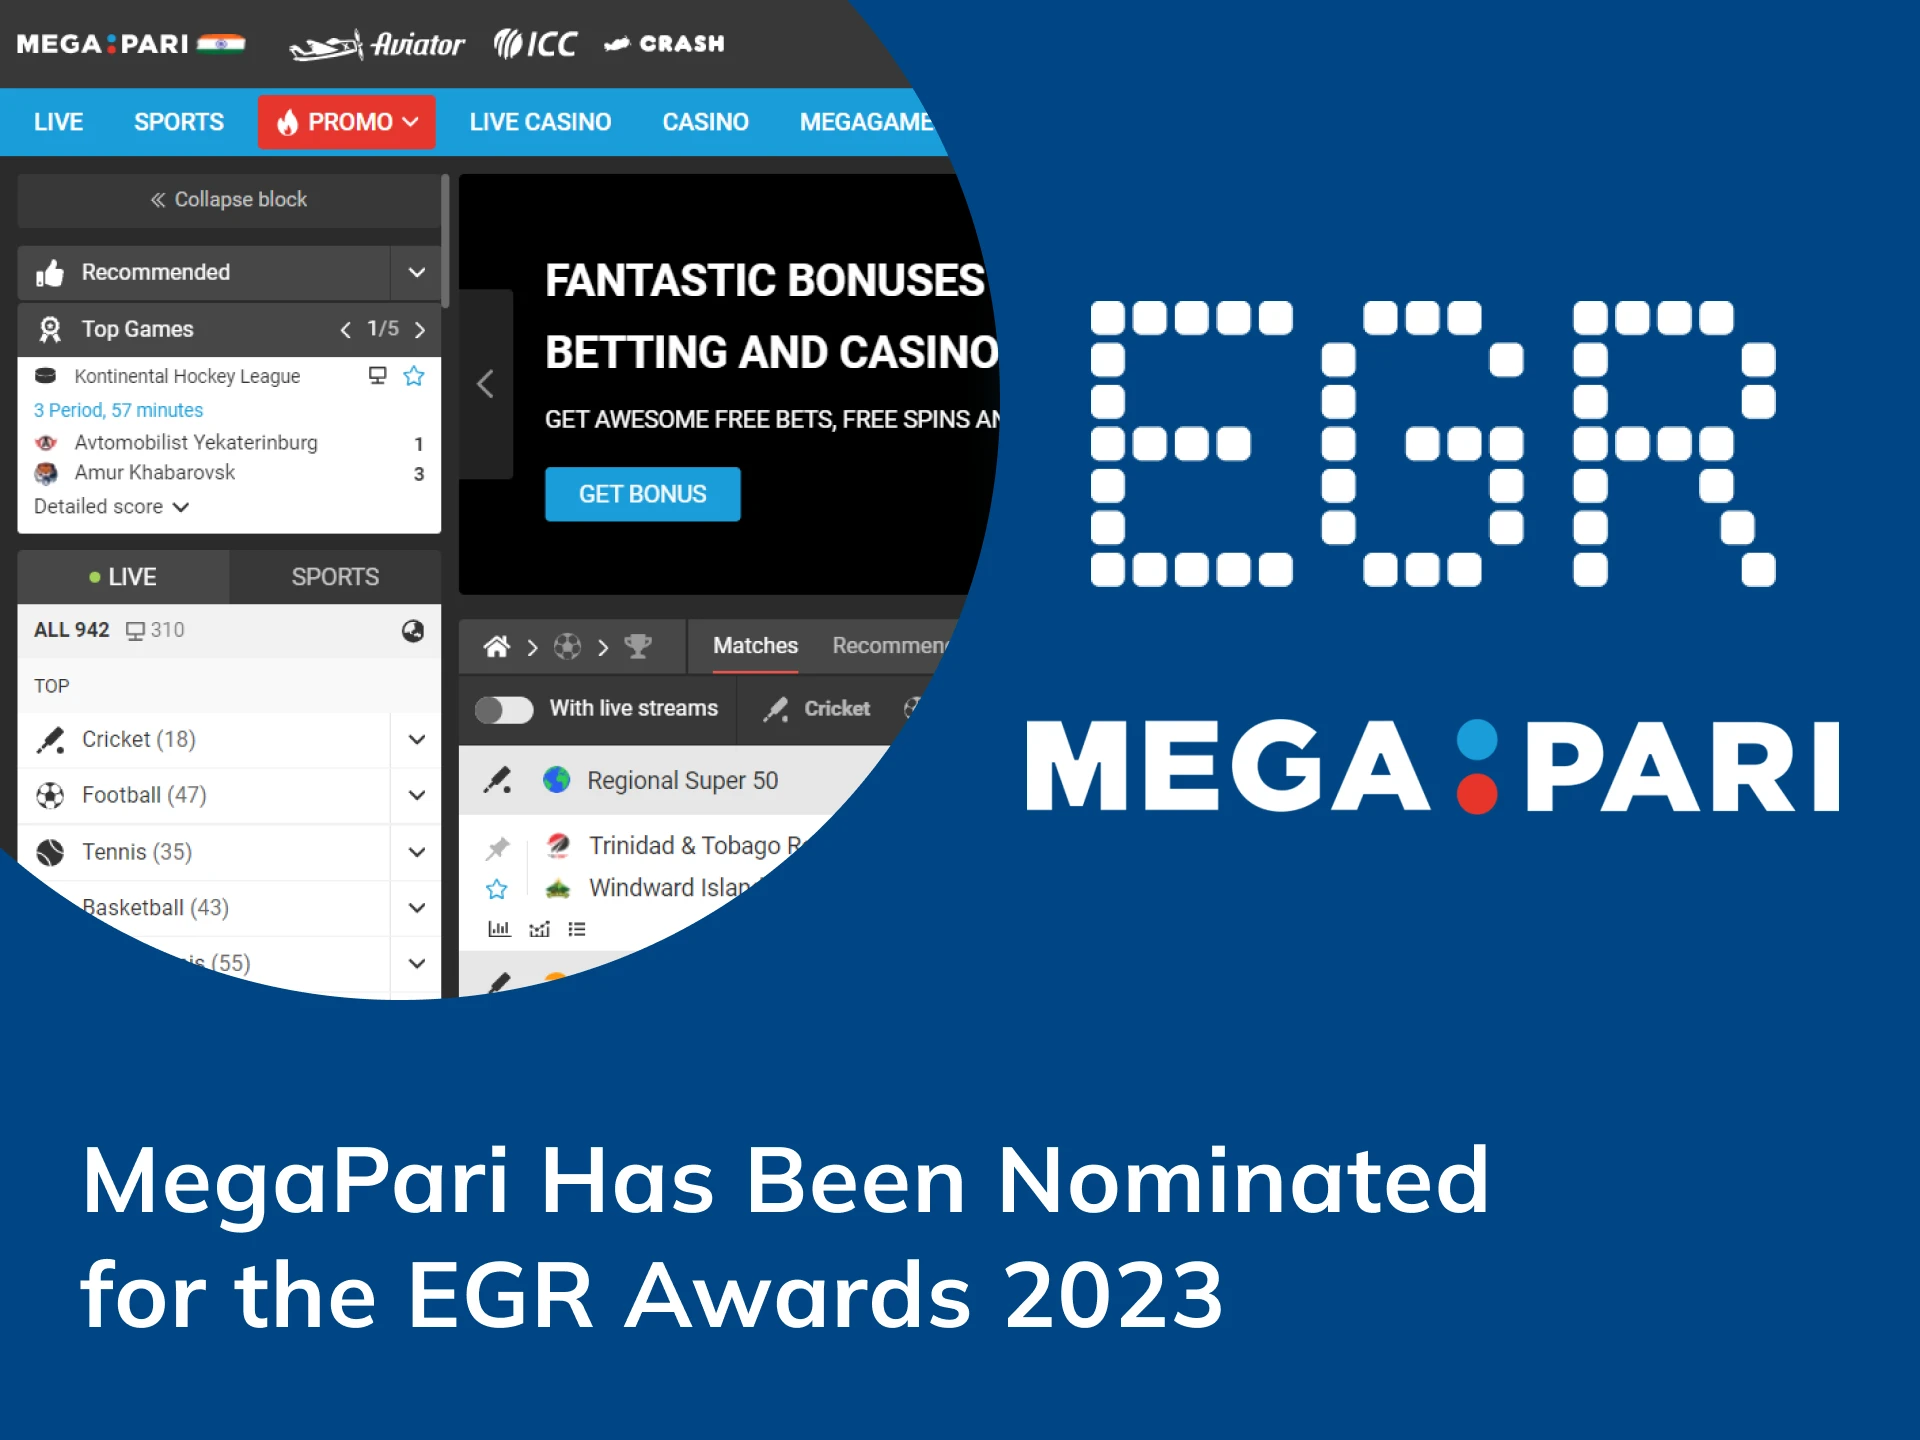 MegaPari, strong player in the sports betting industry, has been nominated the EGR Awards 2023.